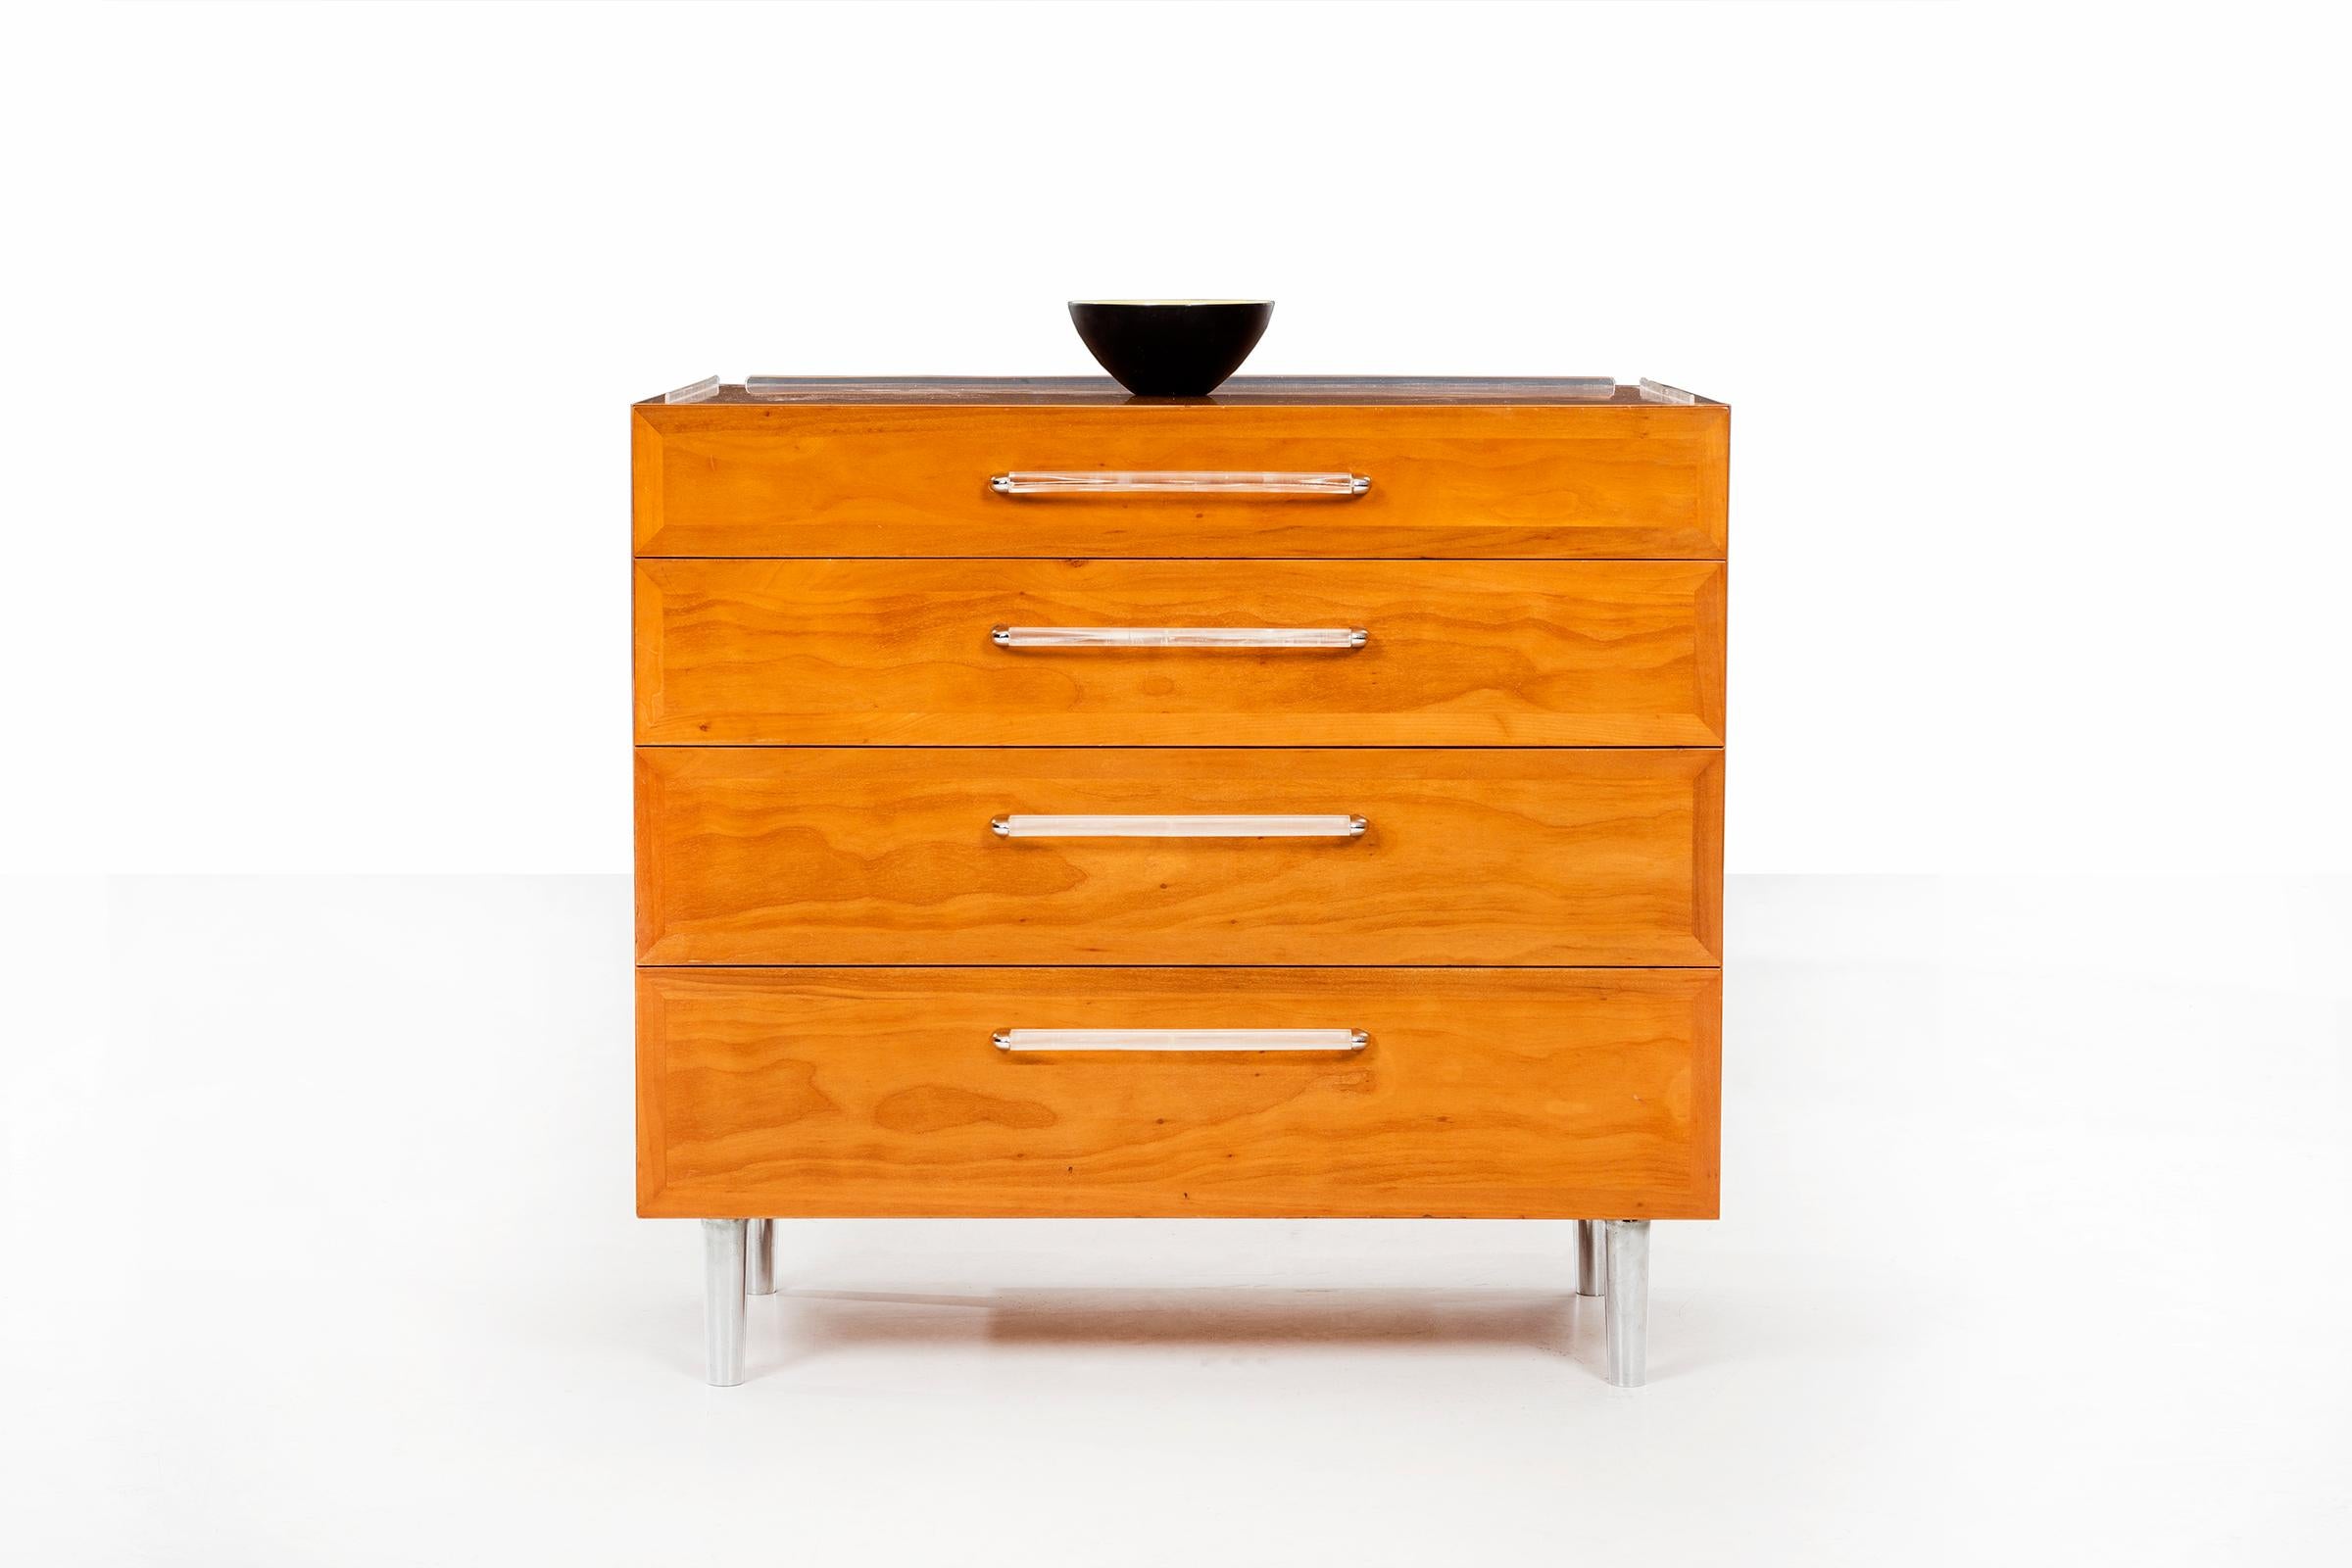 Wormley for Dunbar; Rare 4 drawer dresser, model 5530. Flush paneled drawer fronts in bleached cherry over solid mahogany wood on chrome-plated tapered legs, Lucite pulls. finished on backside.